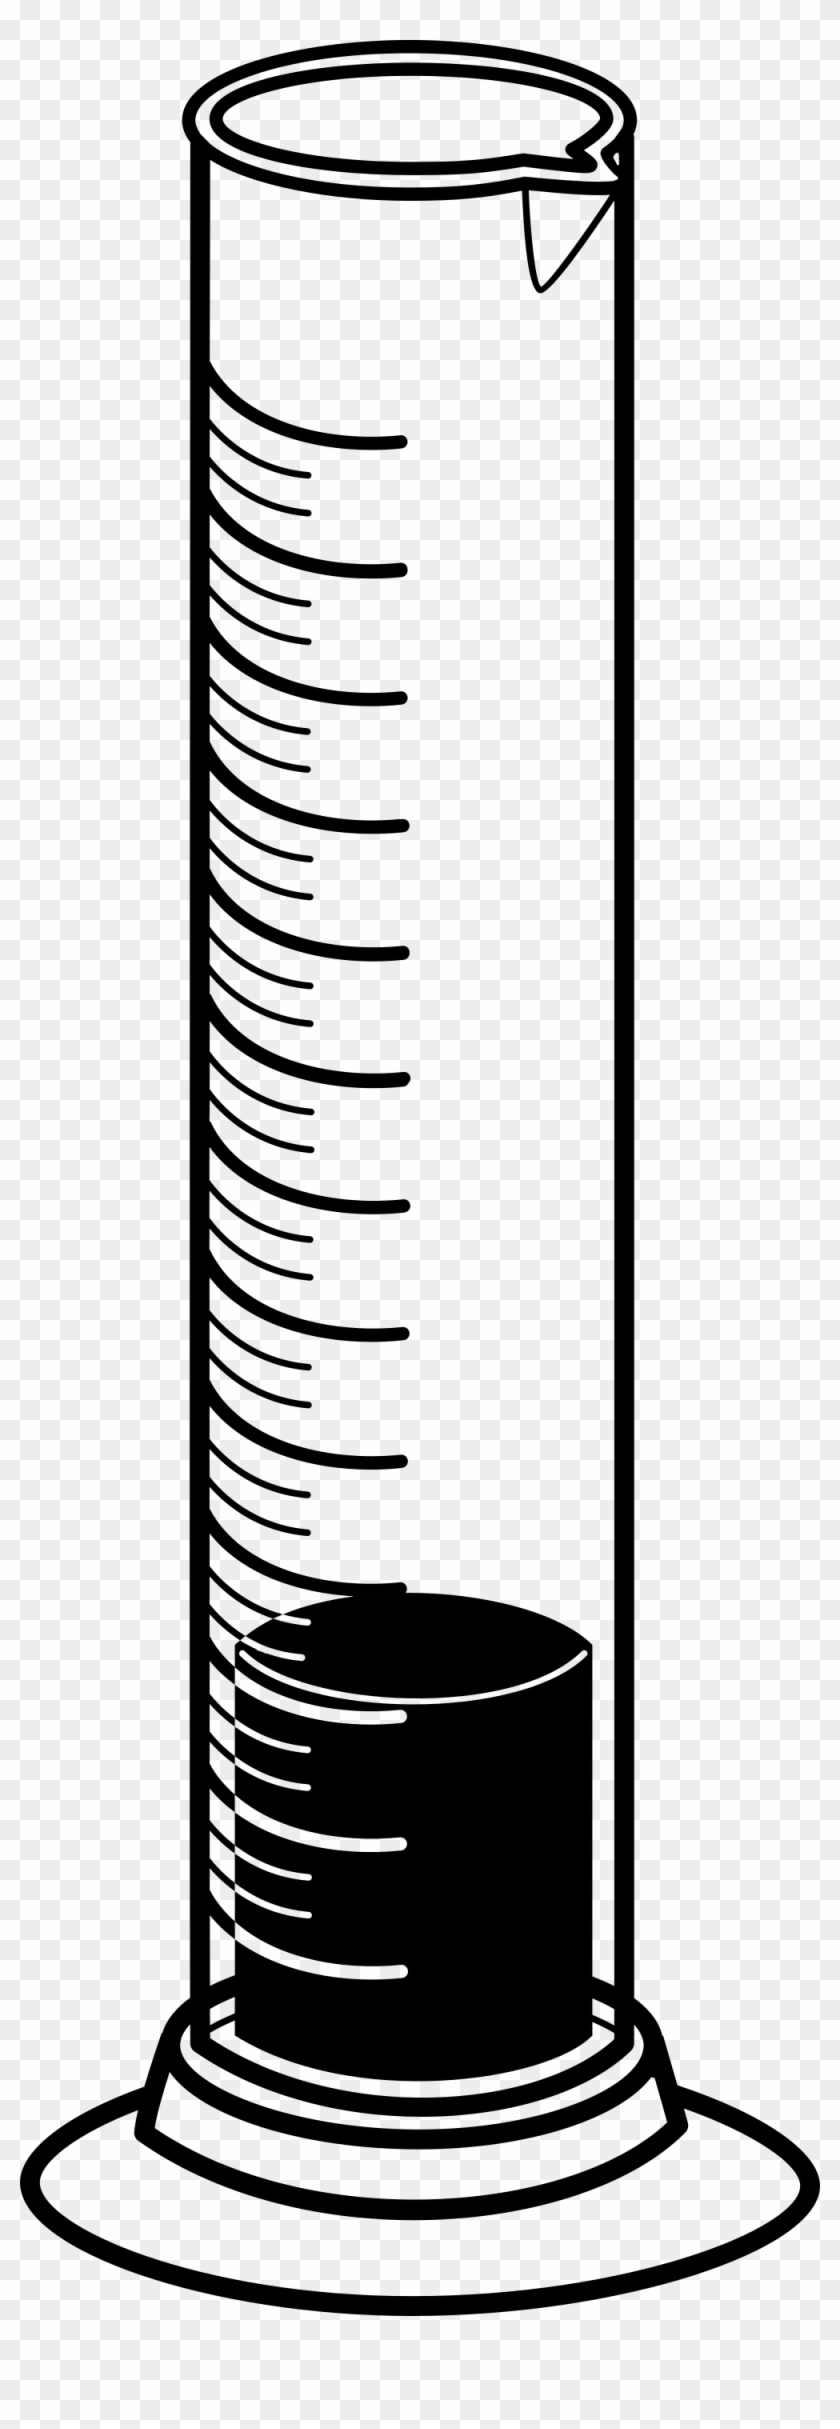 Graduated Cylinder Coloring Page - Graduated Cylinder Coloring #251376